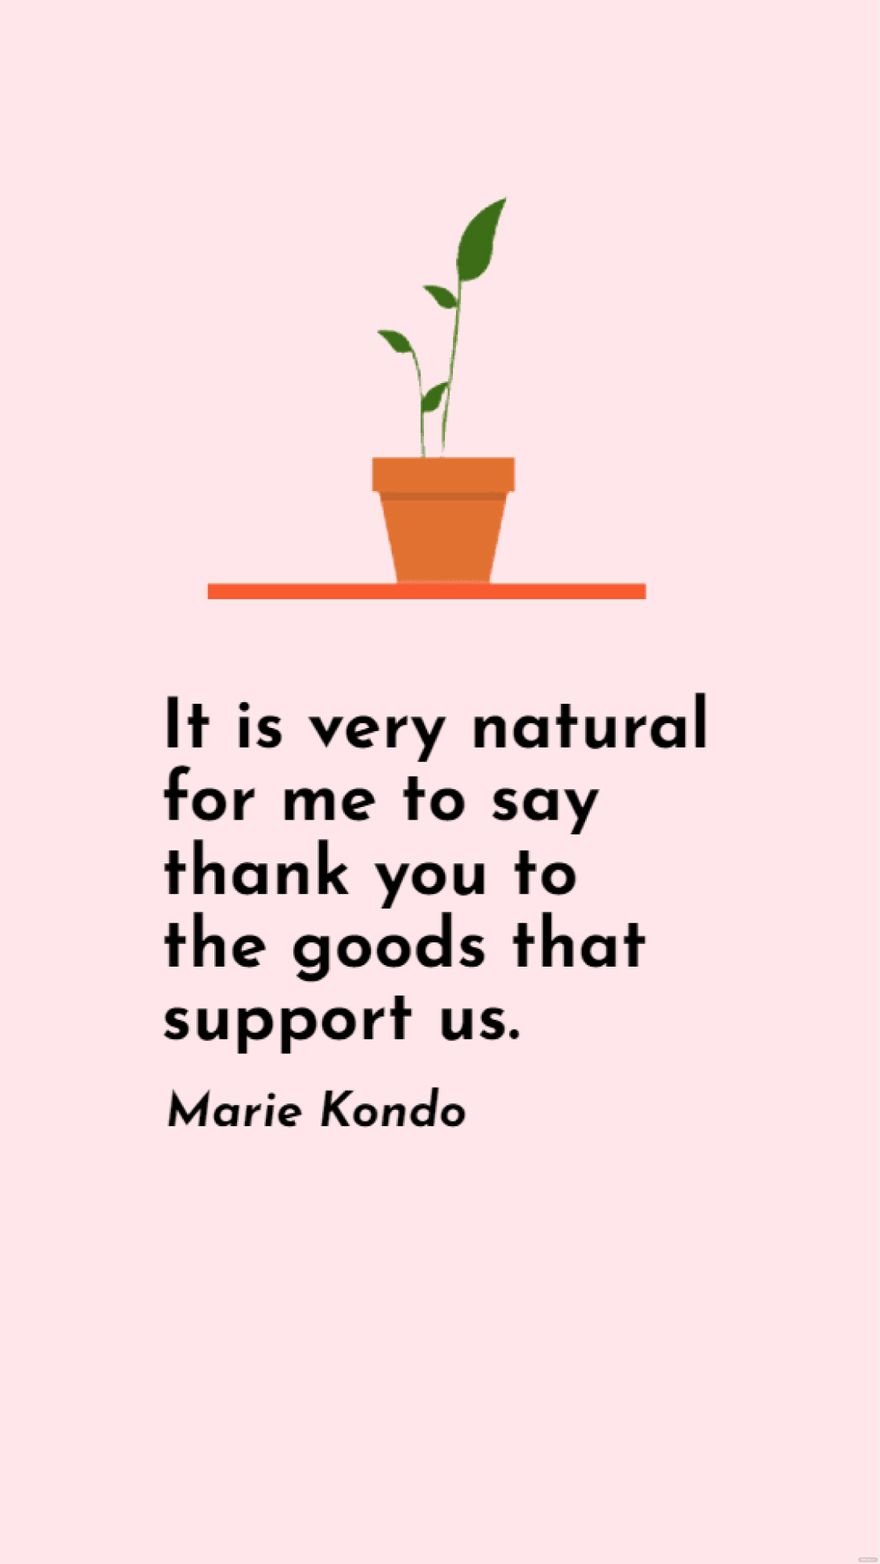 Free Marie Kondo - It is very natural for me to say thank you to the goods that support us. in JPG